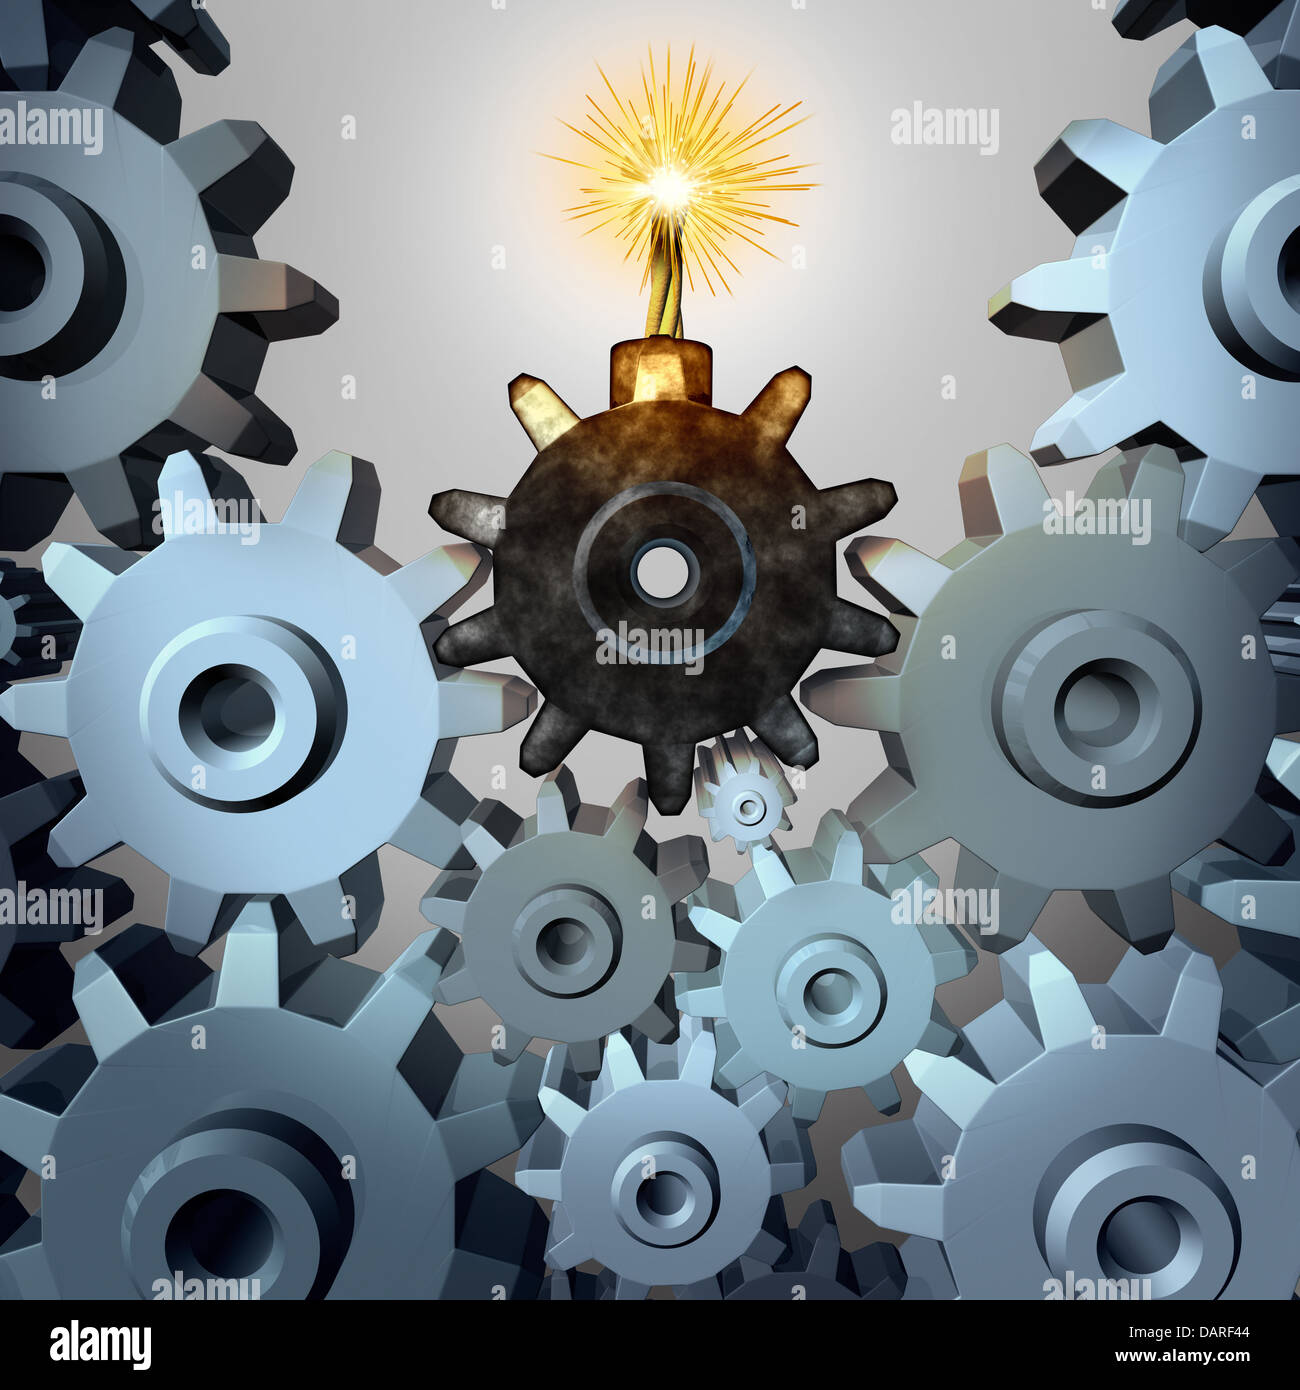 Industry time bomb and financial bubble business concept and metaphor with a group of cogs and gear wheels with one cog in the shape of an exploding device as a symbol of investing danger and inherent risk. Stock Photo